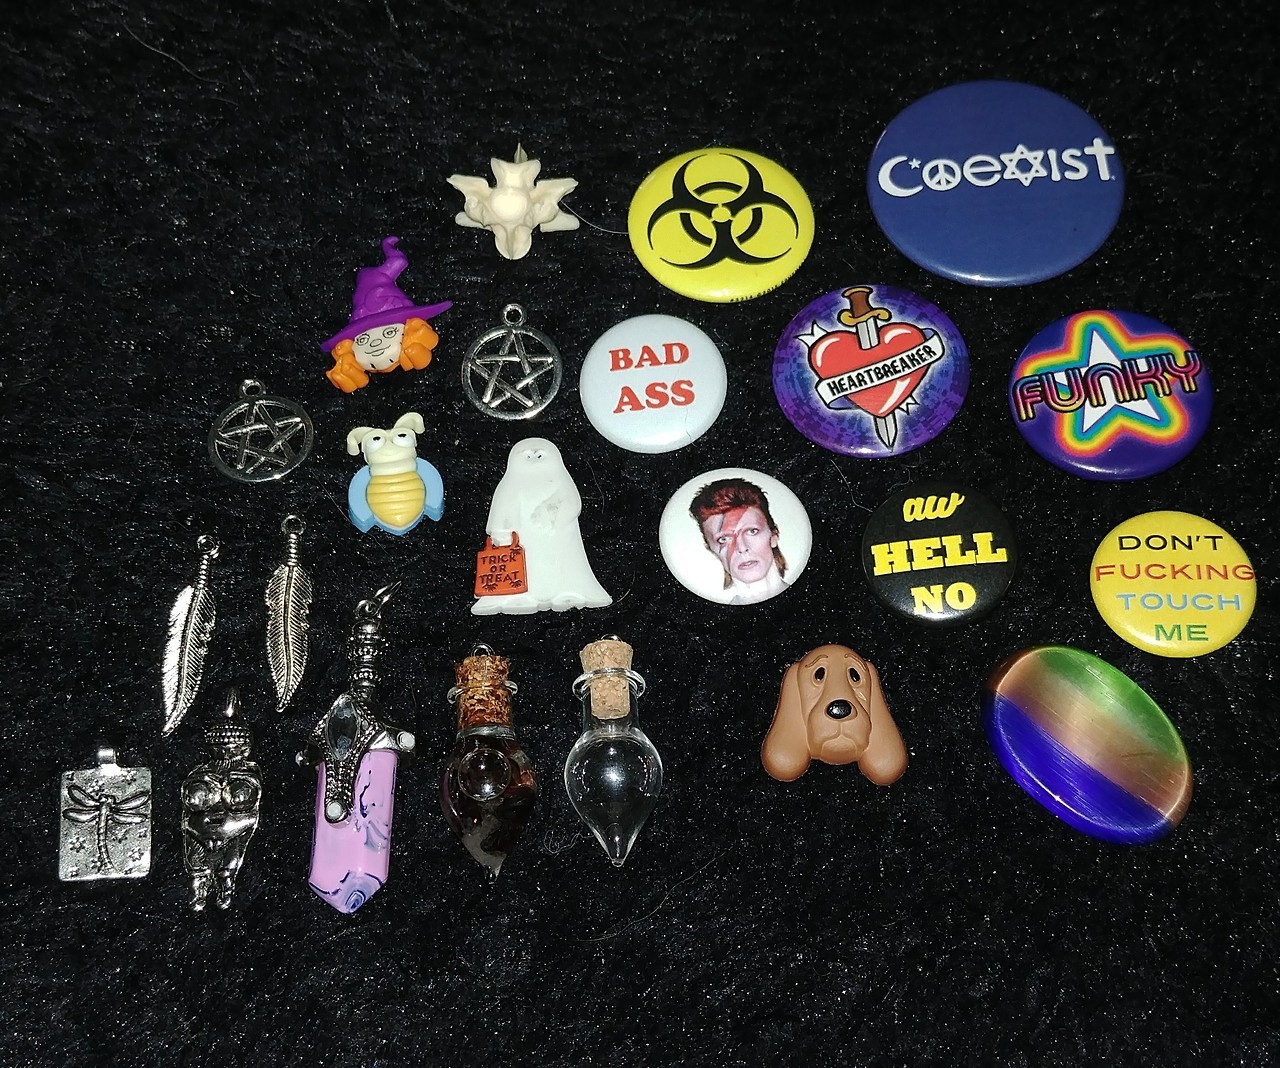 corgiwitch: Hello everyone! I’m super stoked to be posting my first giveaway, I